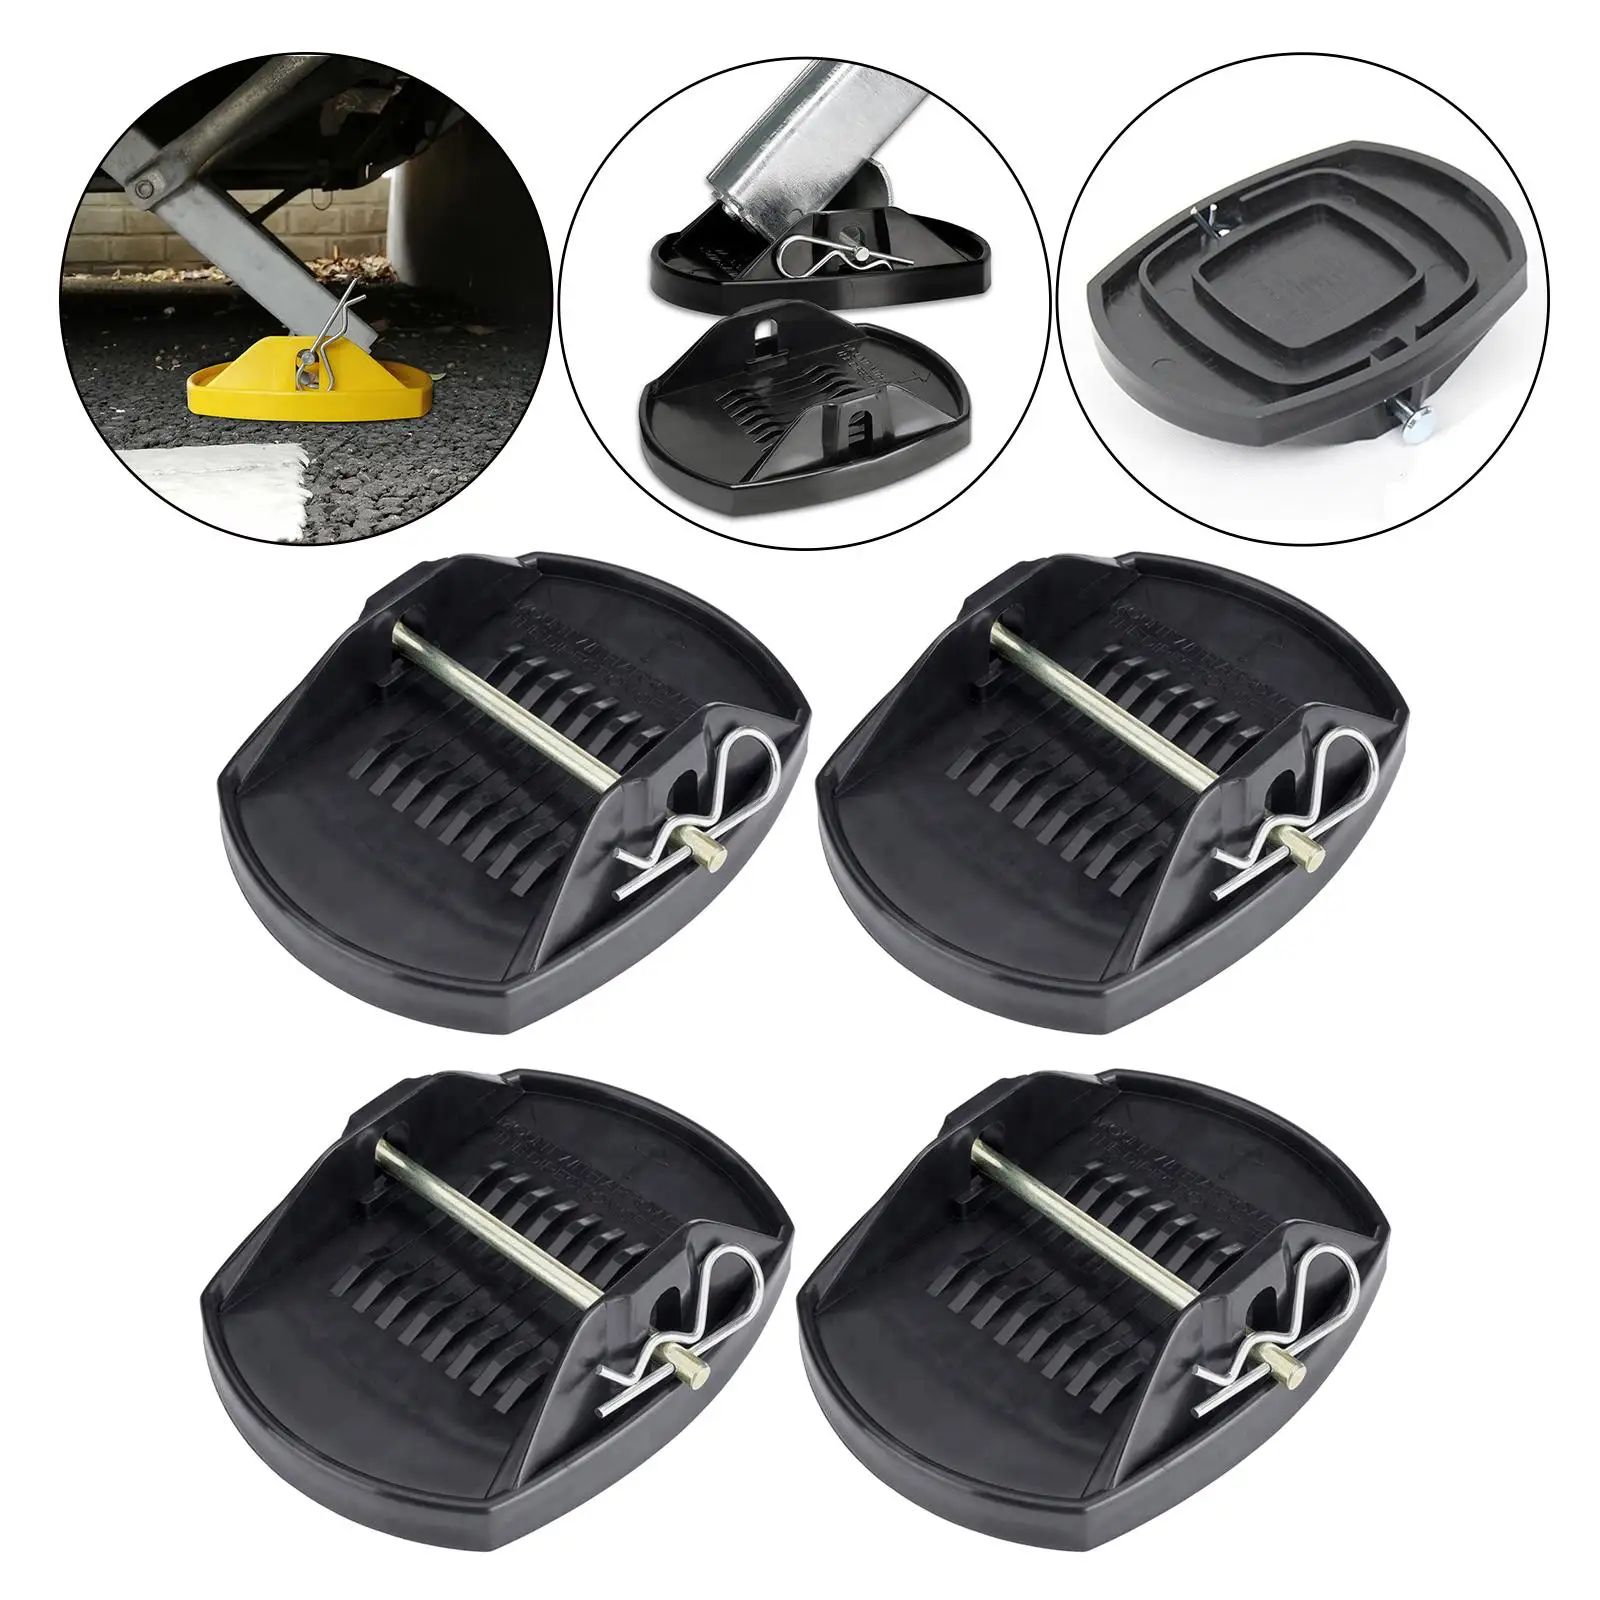 4x Universal Caravan Jack Pads Leveller Wheel Foot Leg Support Jacking Lift Pad Support Stand Adapter for Trailers RV